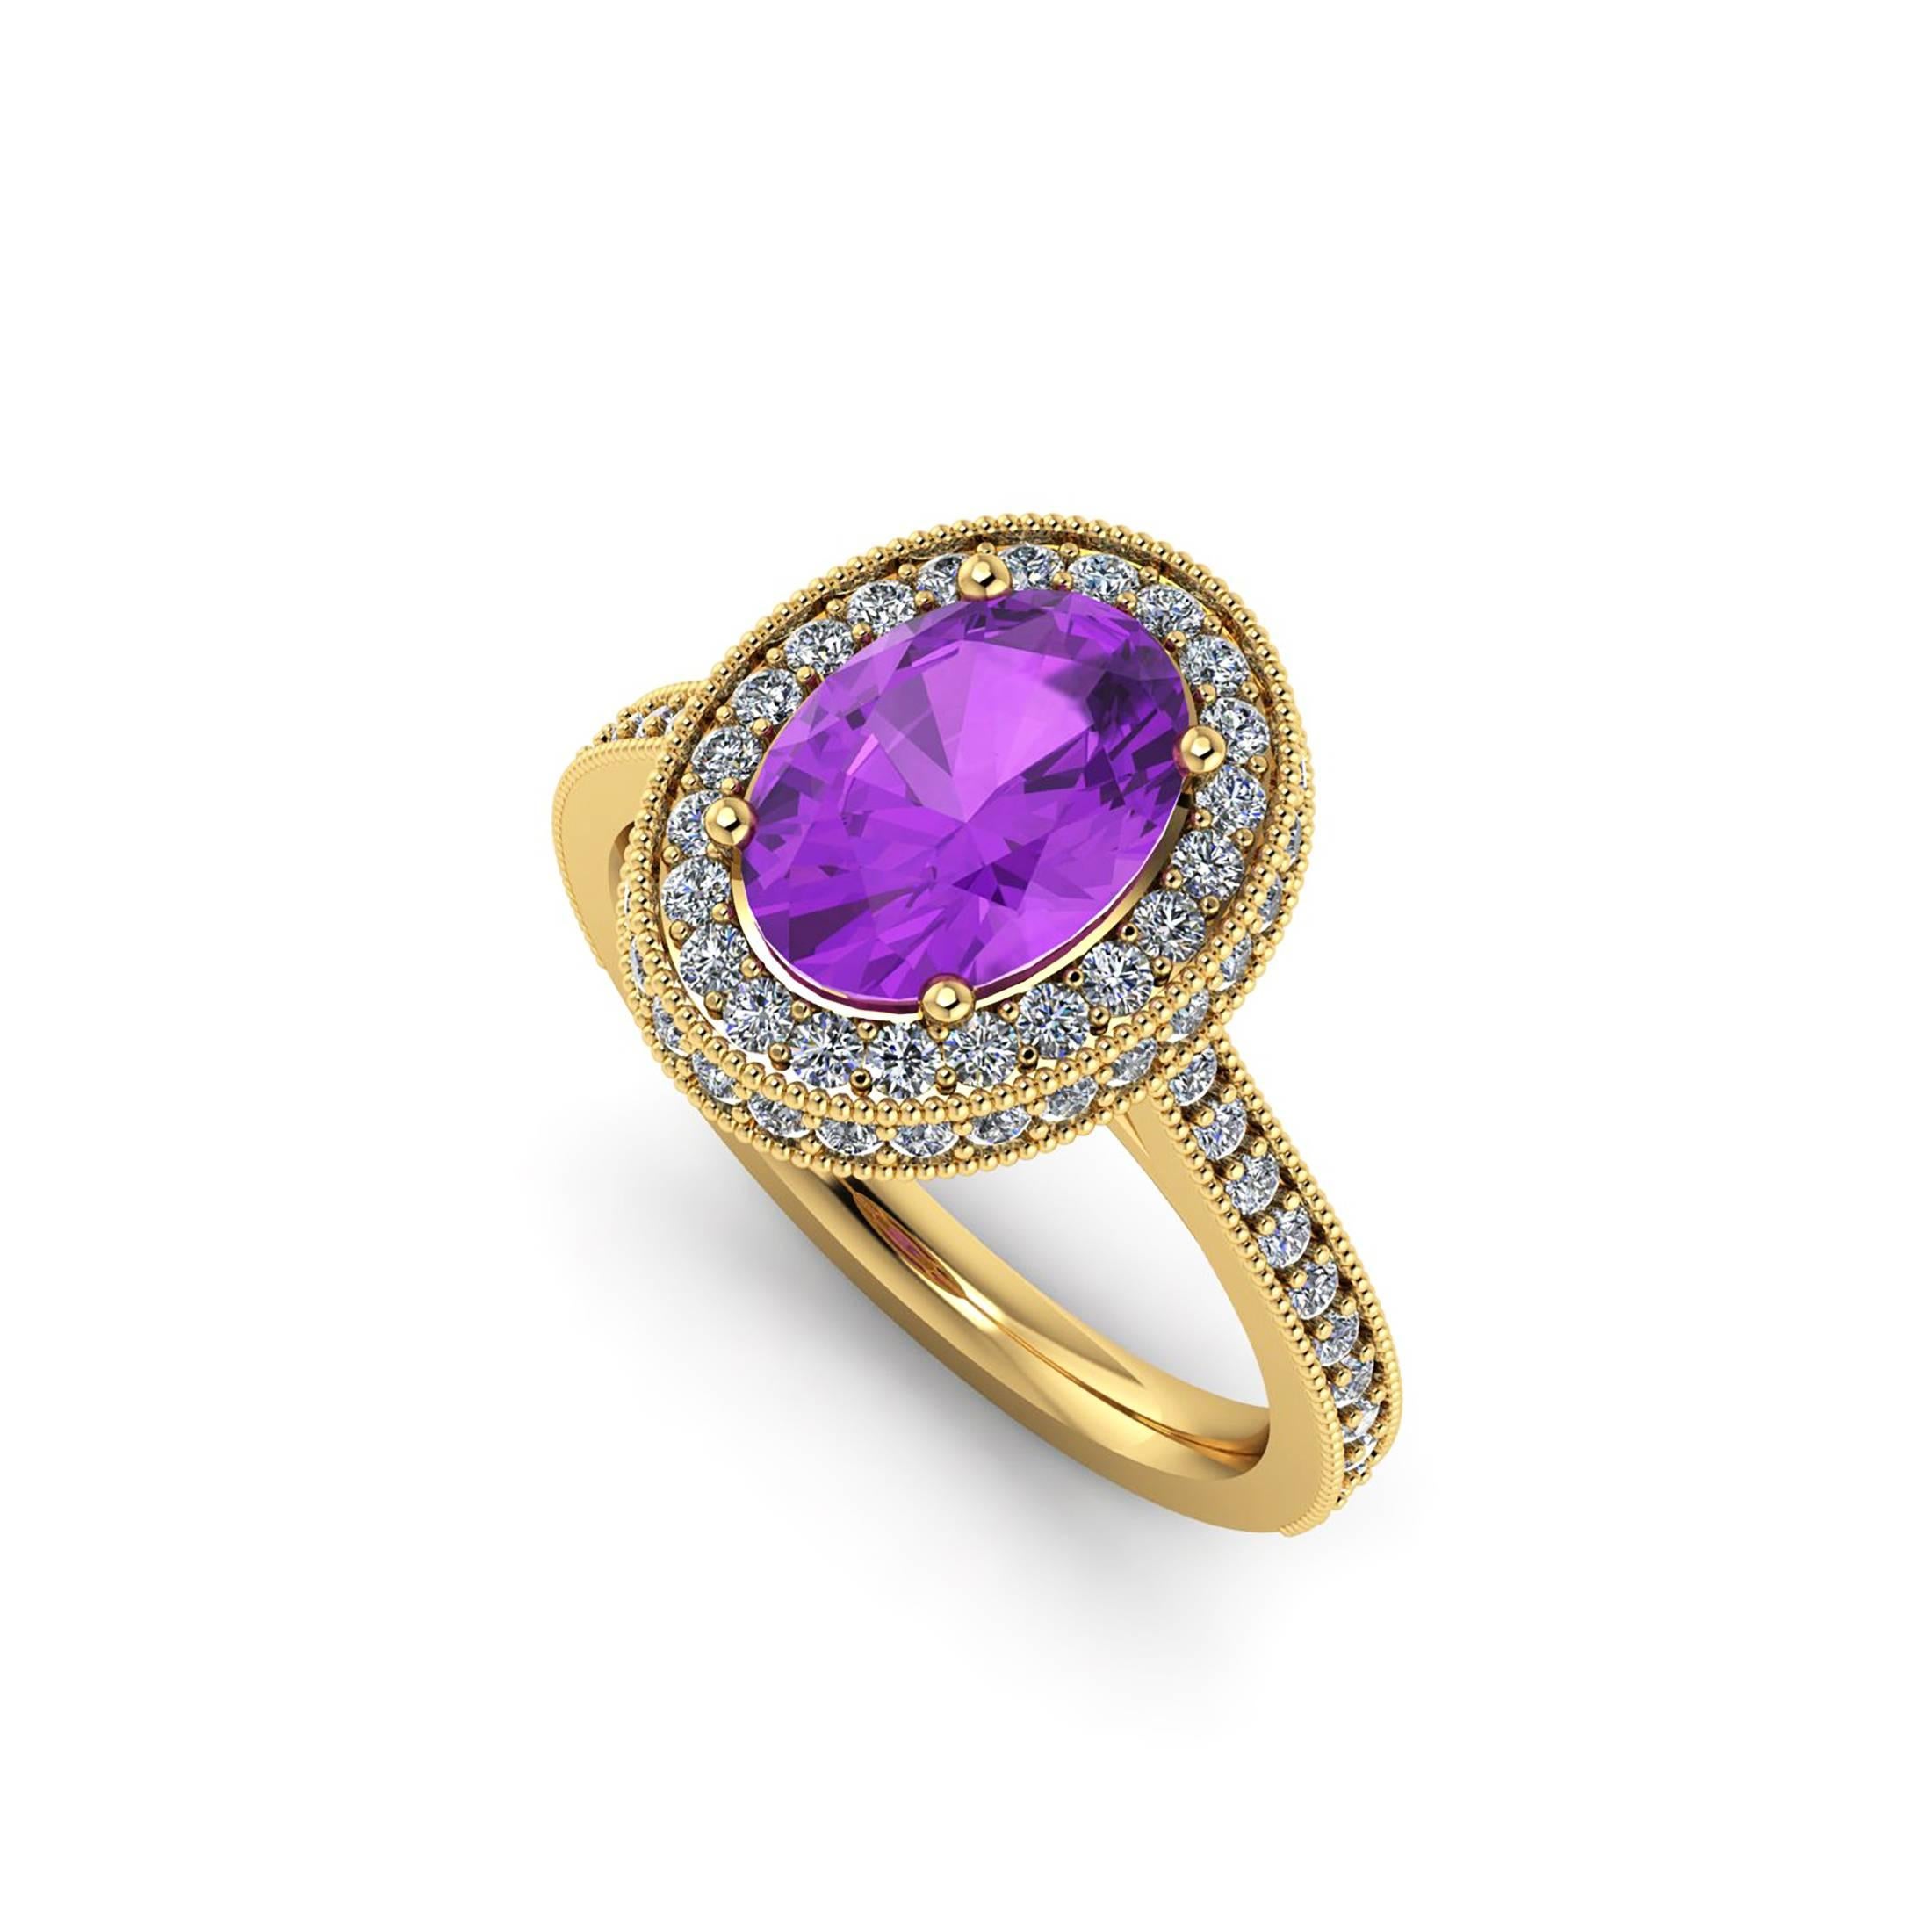 Ferrucci natural purple Amethyst adorned by a double halo of round bright diamonds for a total carat weight of 0.51 carats, conceived in a hand made 18k yellow gold ring.

Hand made and designed in New York City by master jeweler Francesco Ferrucci,